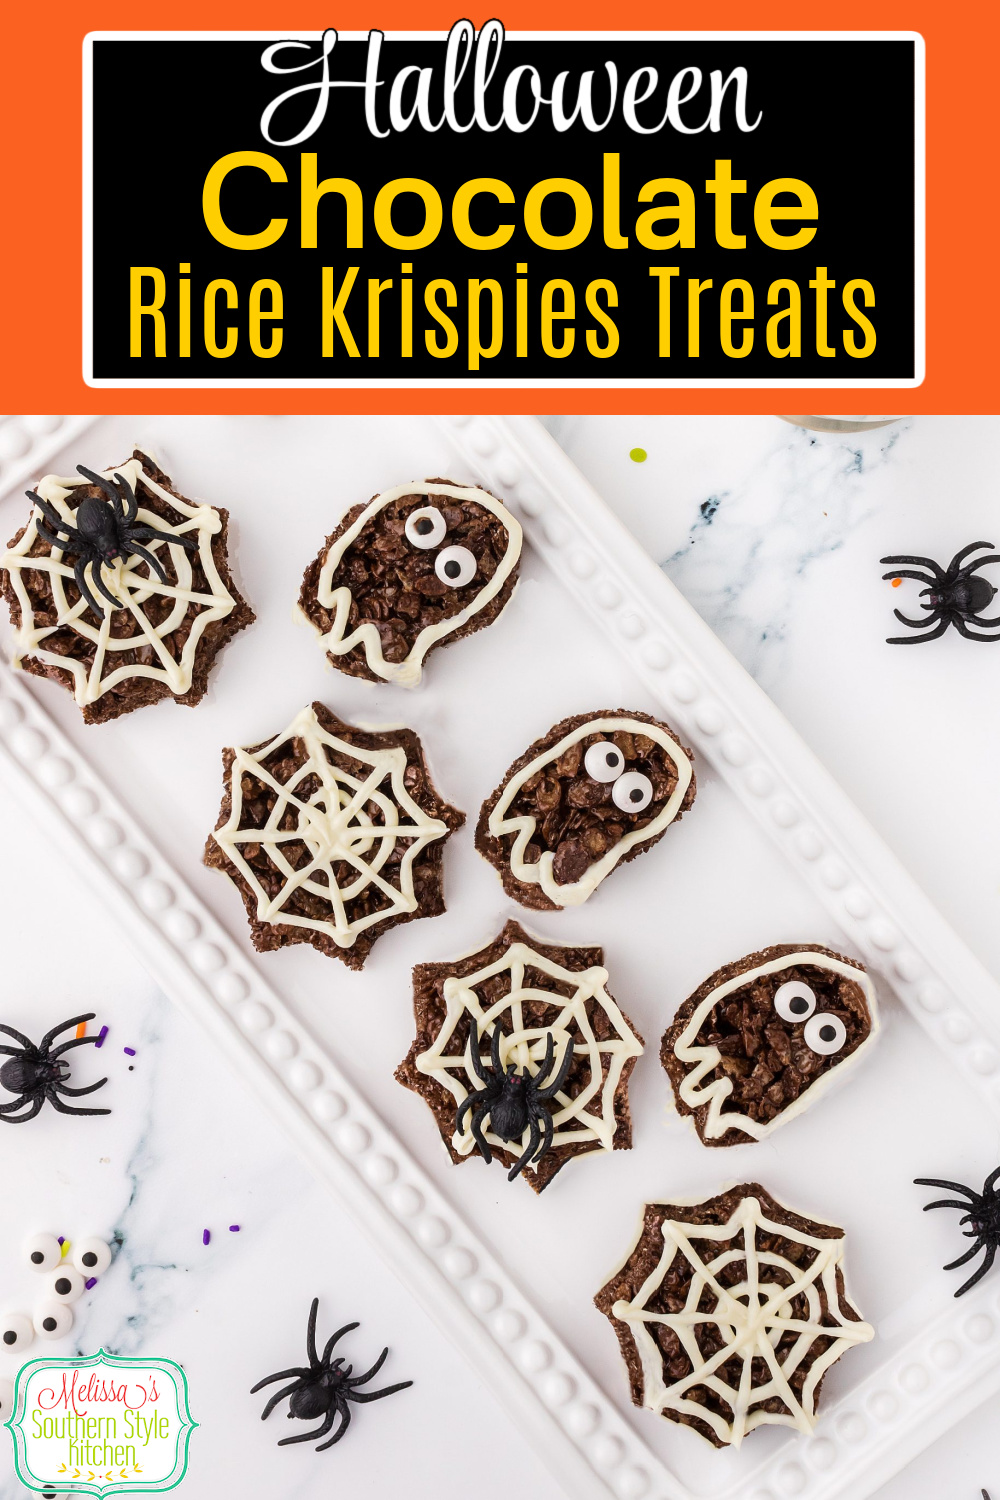 These Chocolate Rice Krispies Treats for Halloween are a fun family project! #chocolatericekrispiestreats #ricekrispiestreats #easychocolatedesserts #diyricekrispiestreats #ricekrispies #chocolatetreats #halloweendesserts via @melissasssk